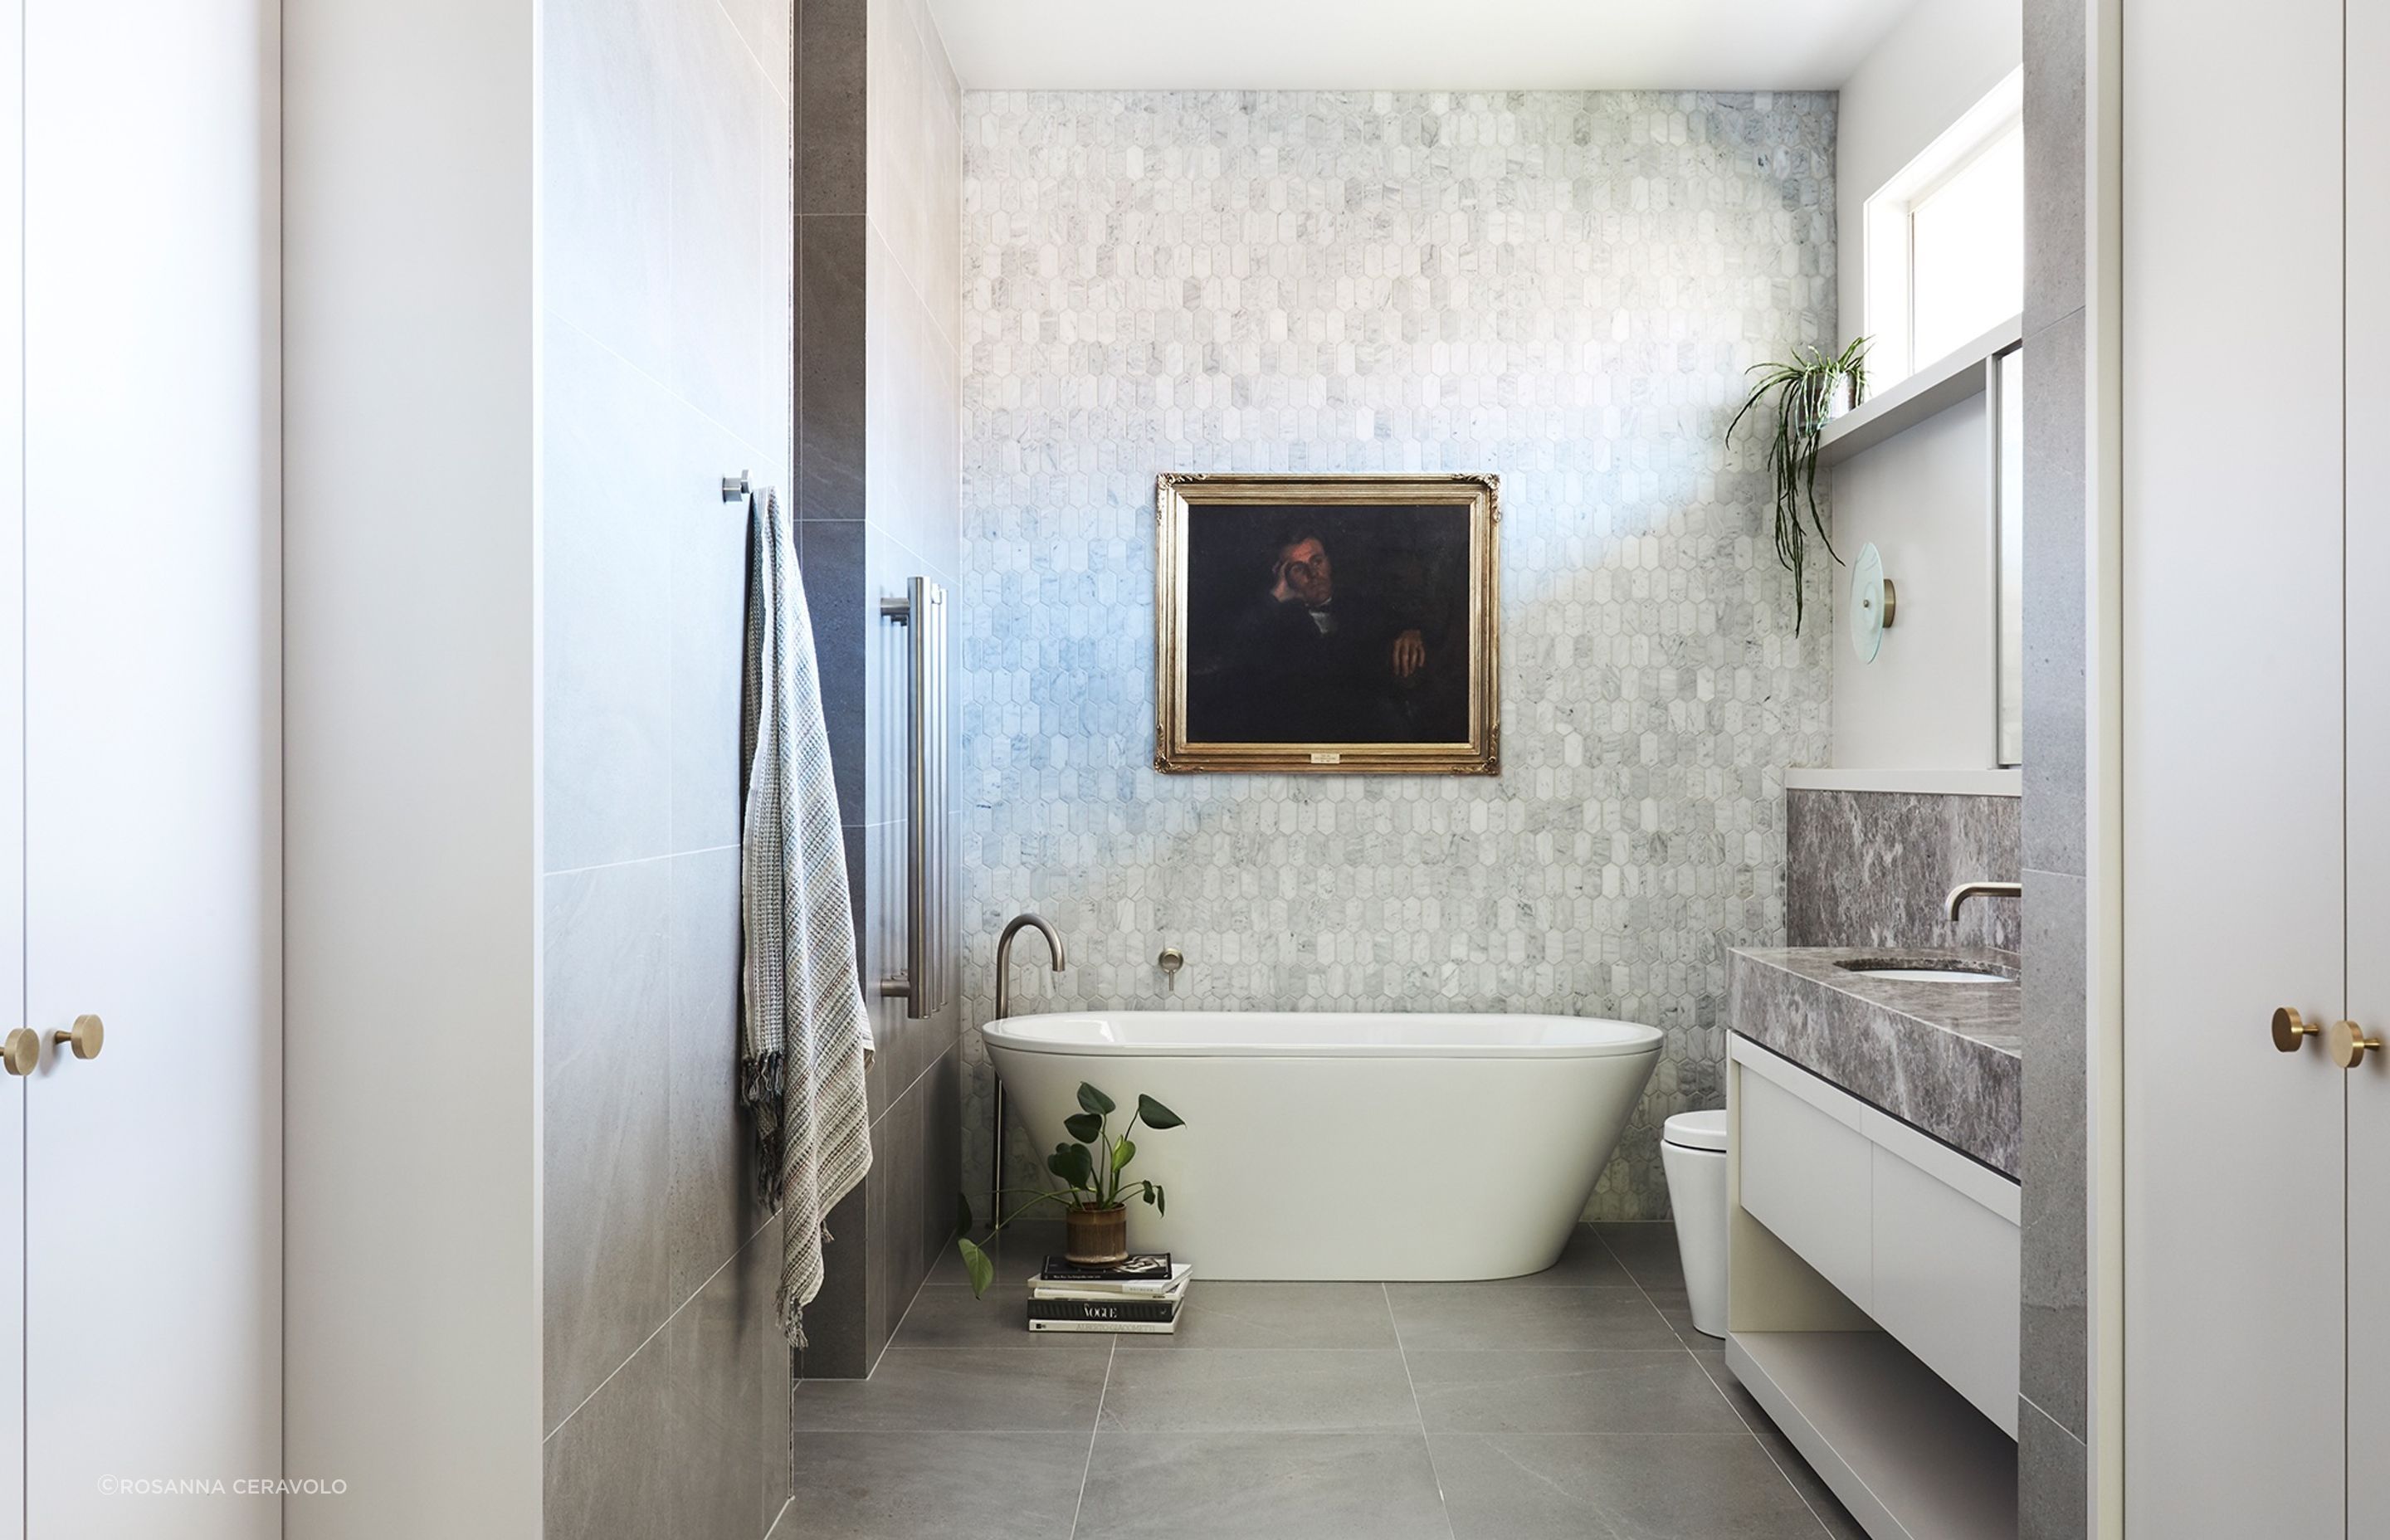 Spaciousness in all its glory at Camberwell House. Luxury bathrooms are often larger than the average sized bathroom.